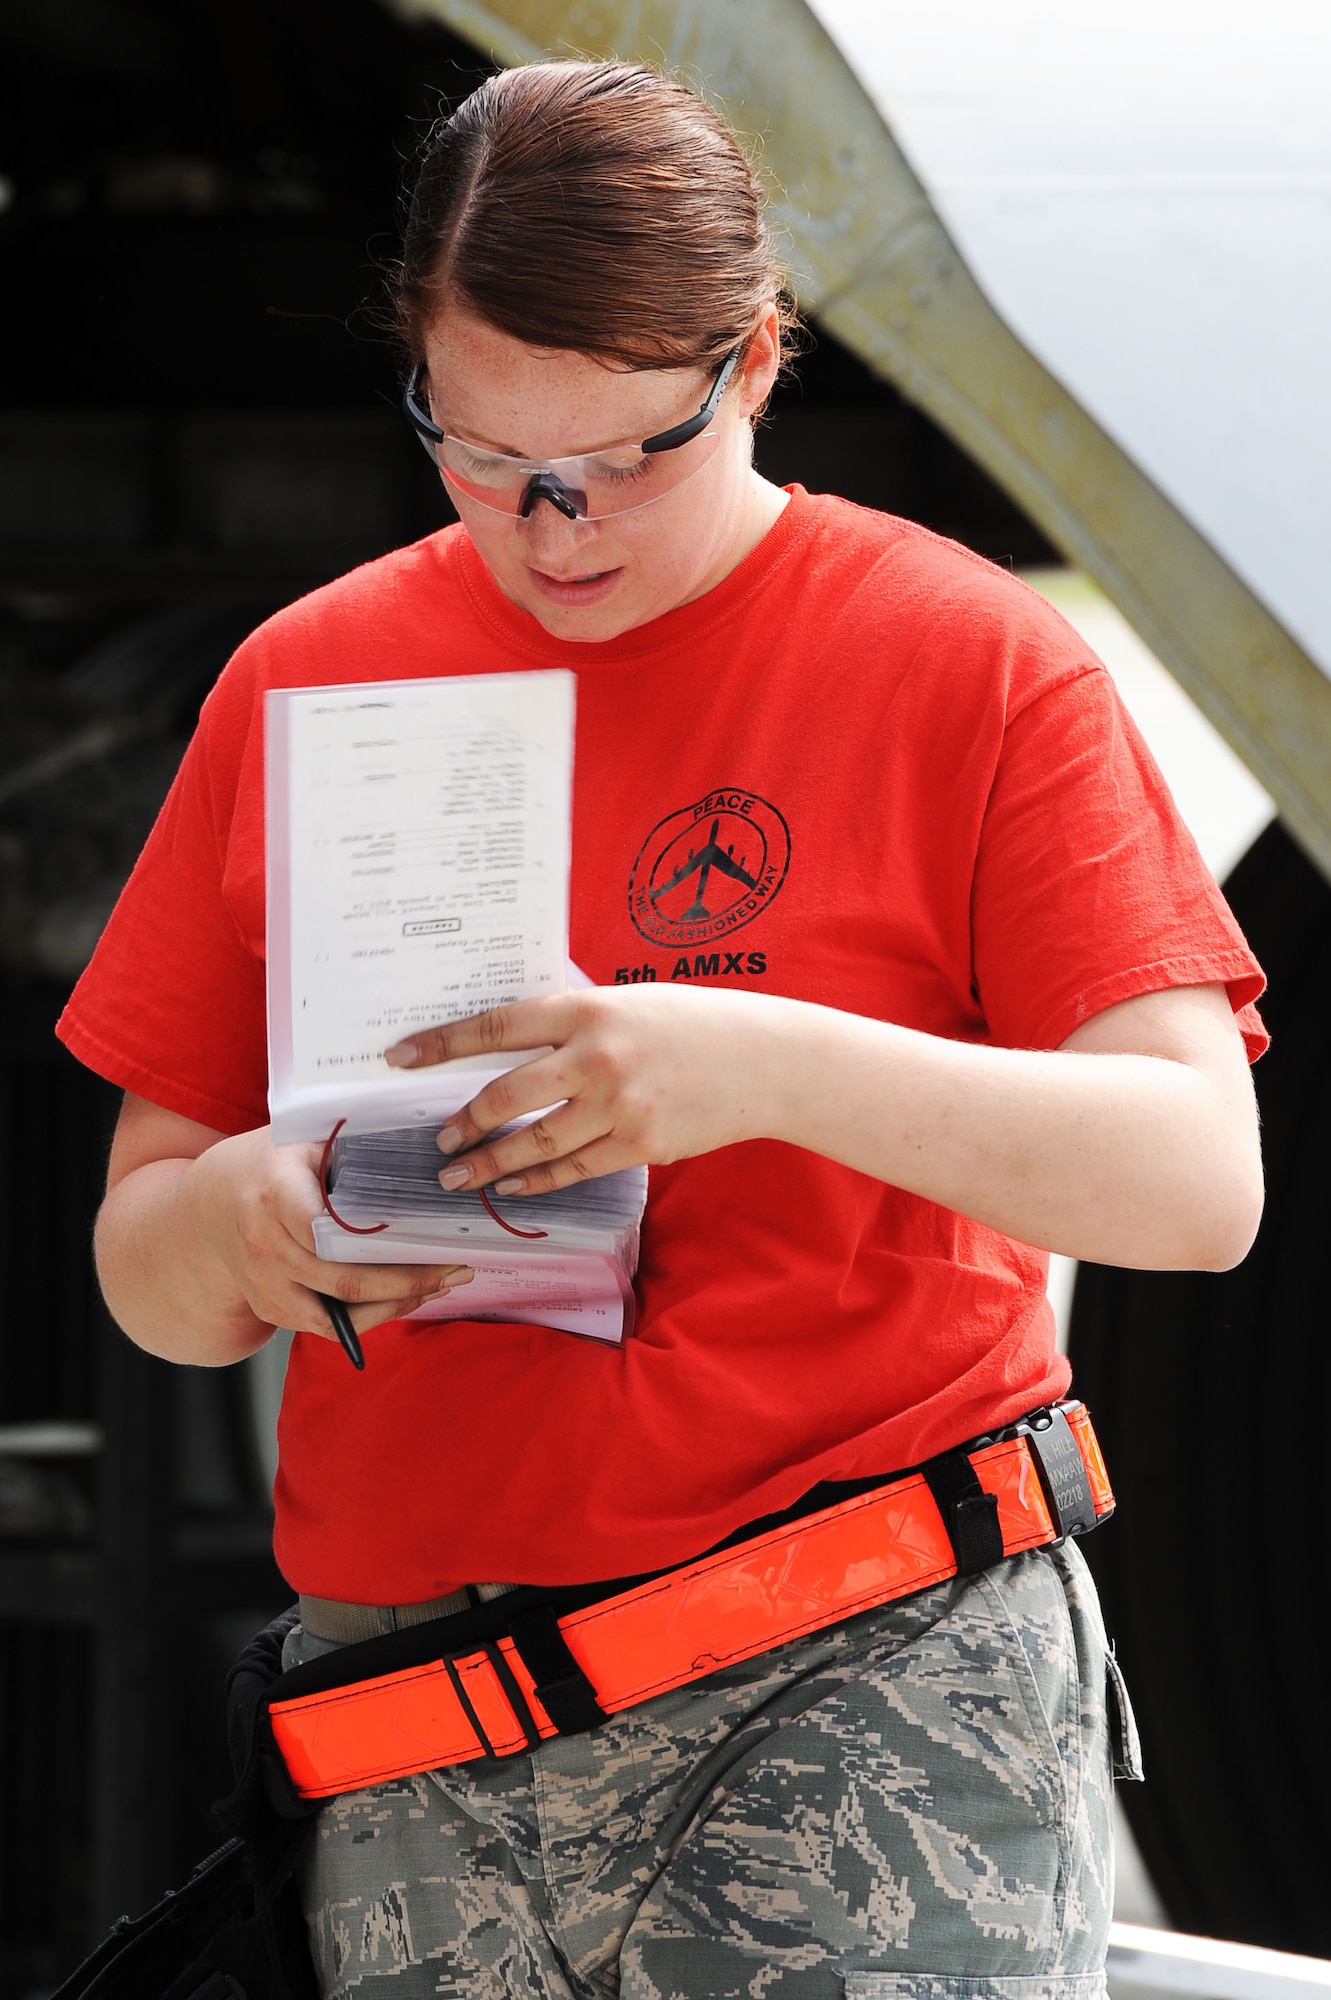 An Airmen from the 23rd Aircraft Maintenance Unit load crew goes over a checklist during the Load Crew of the Quarter competition at Dock 7 at Minot Air Force Base, N.D., July 22, 2016. The competition was comprised of four parts: dress and appearance, a loader’s knowledge test, toolbox inspection and the timed missile load. (U.S. Air Force photo/Senior Airman Kristoffer Kaubisch)